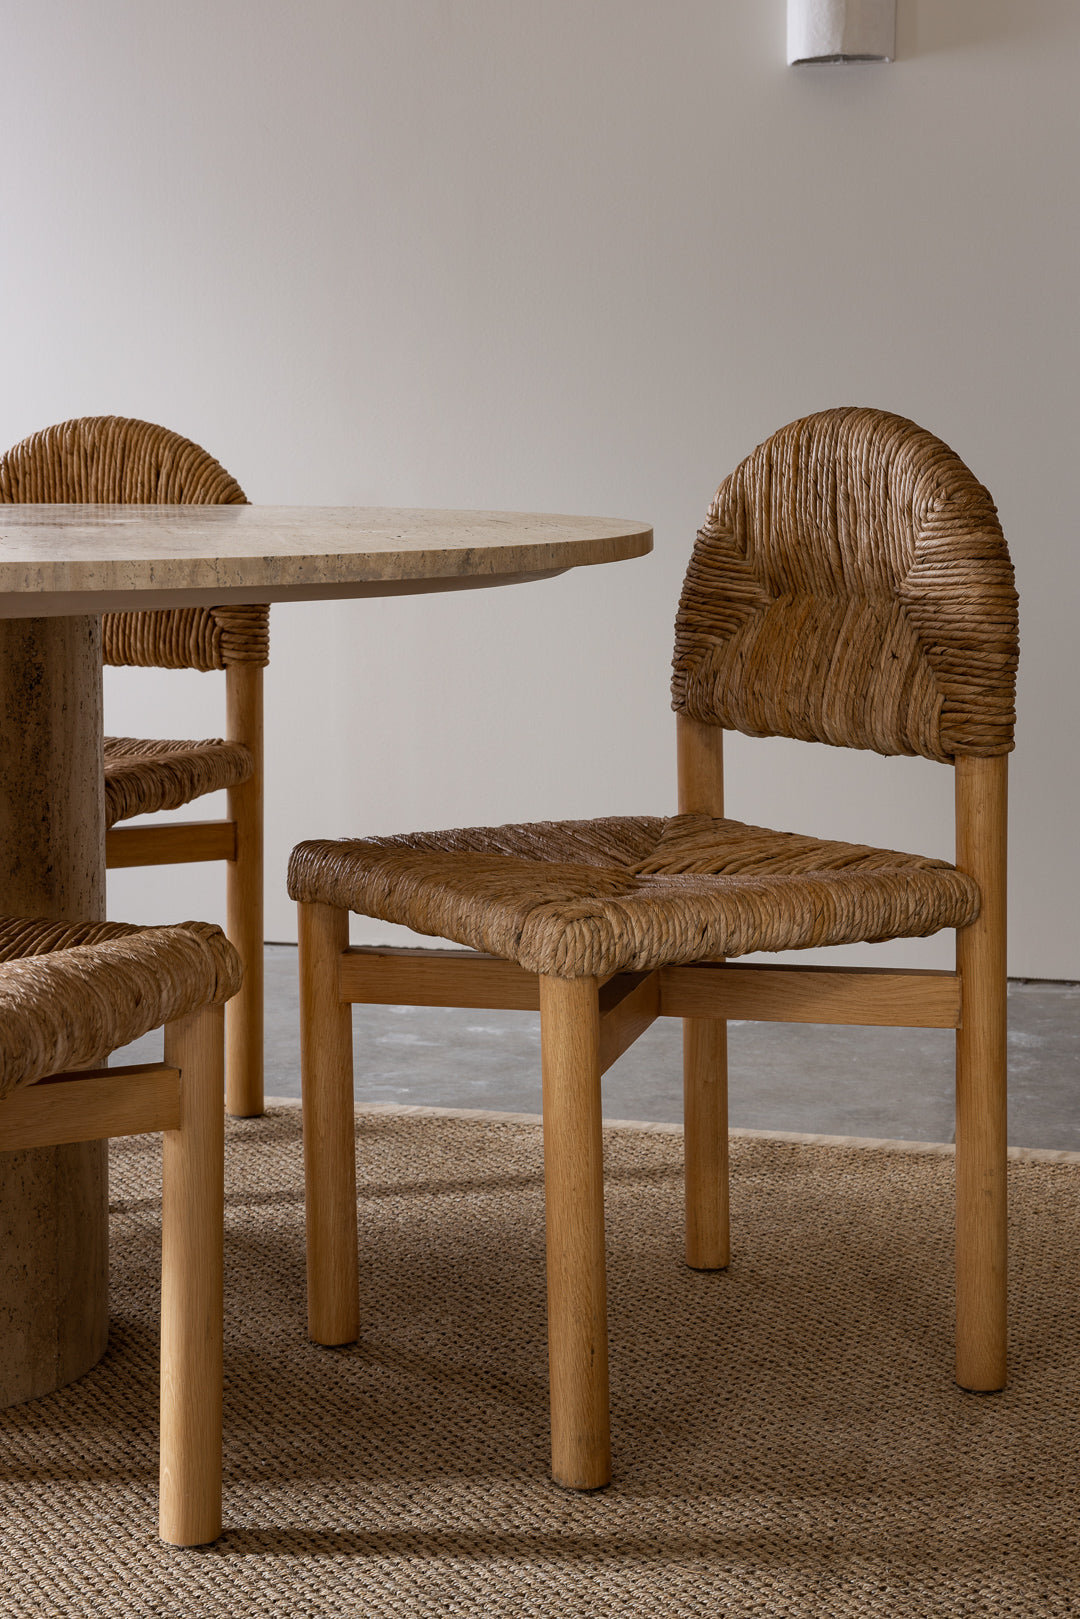 The Grace Dining Chair by Rachel Donath